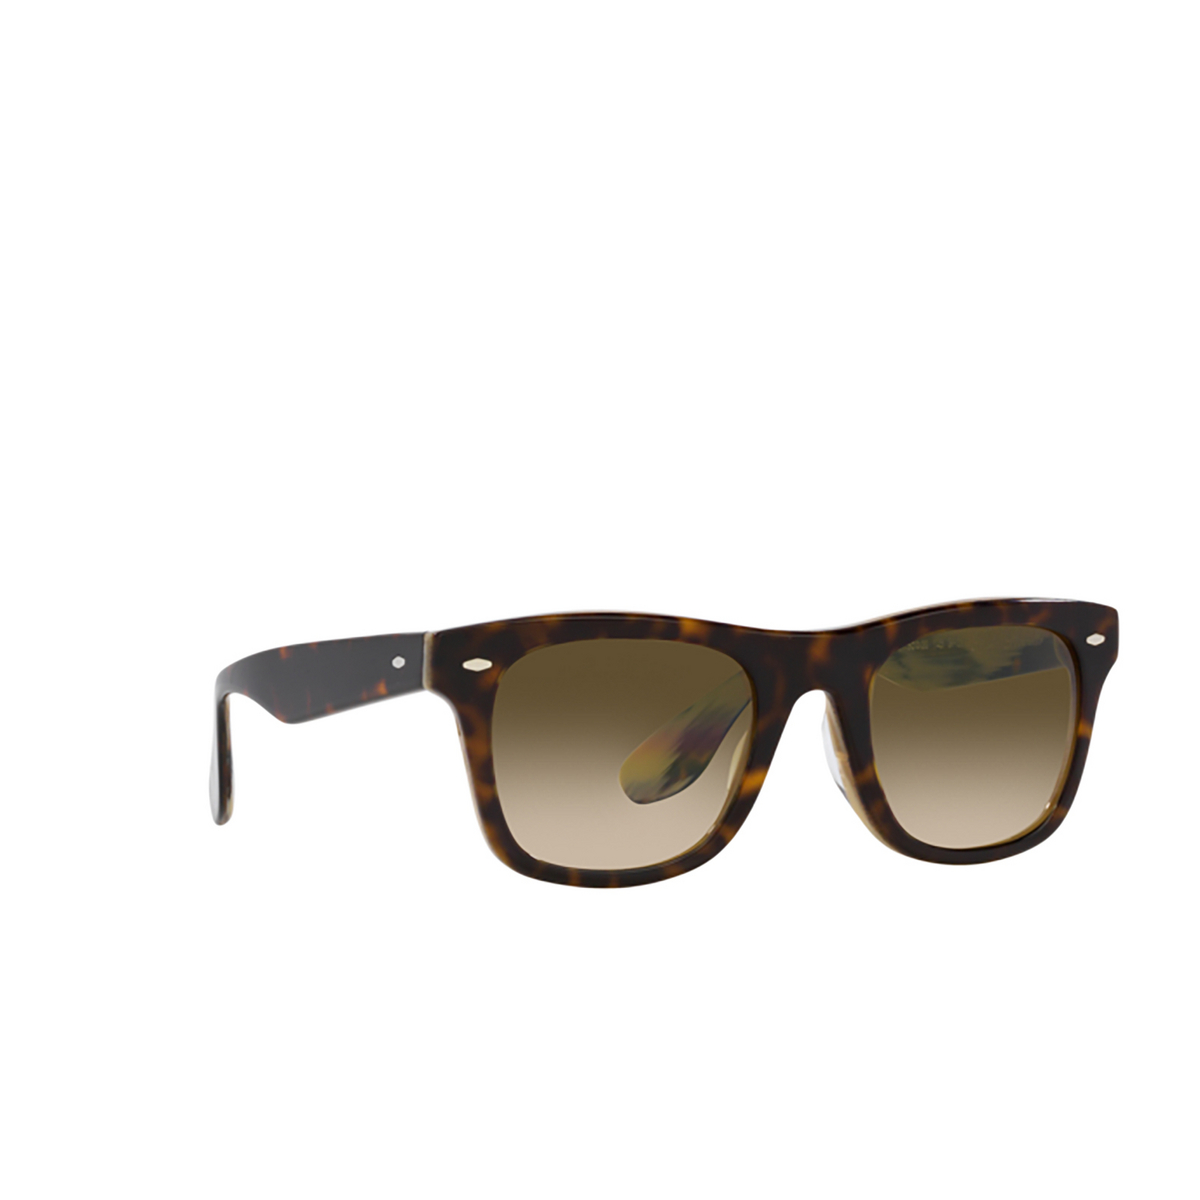 Oliver Peoples MISTER BRUNELLO Sunglasses 166685 362/ Horn - three-quarters view